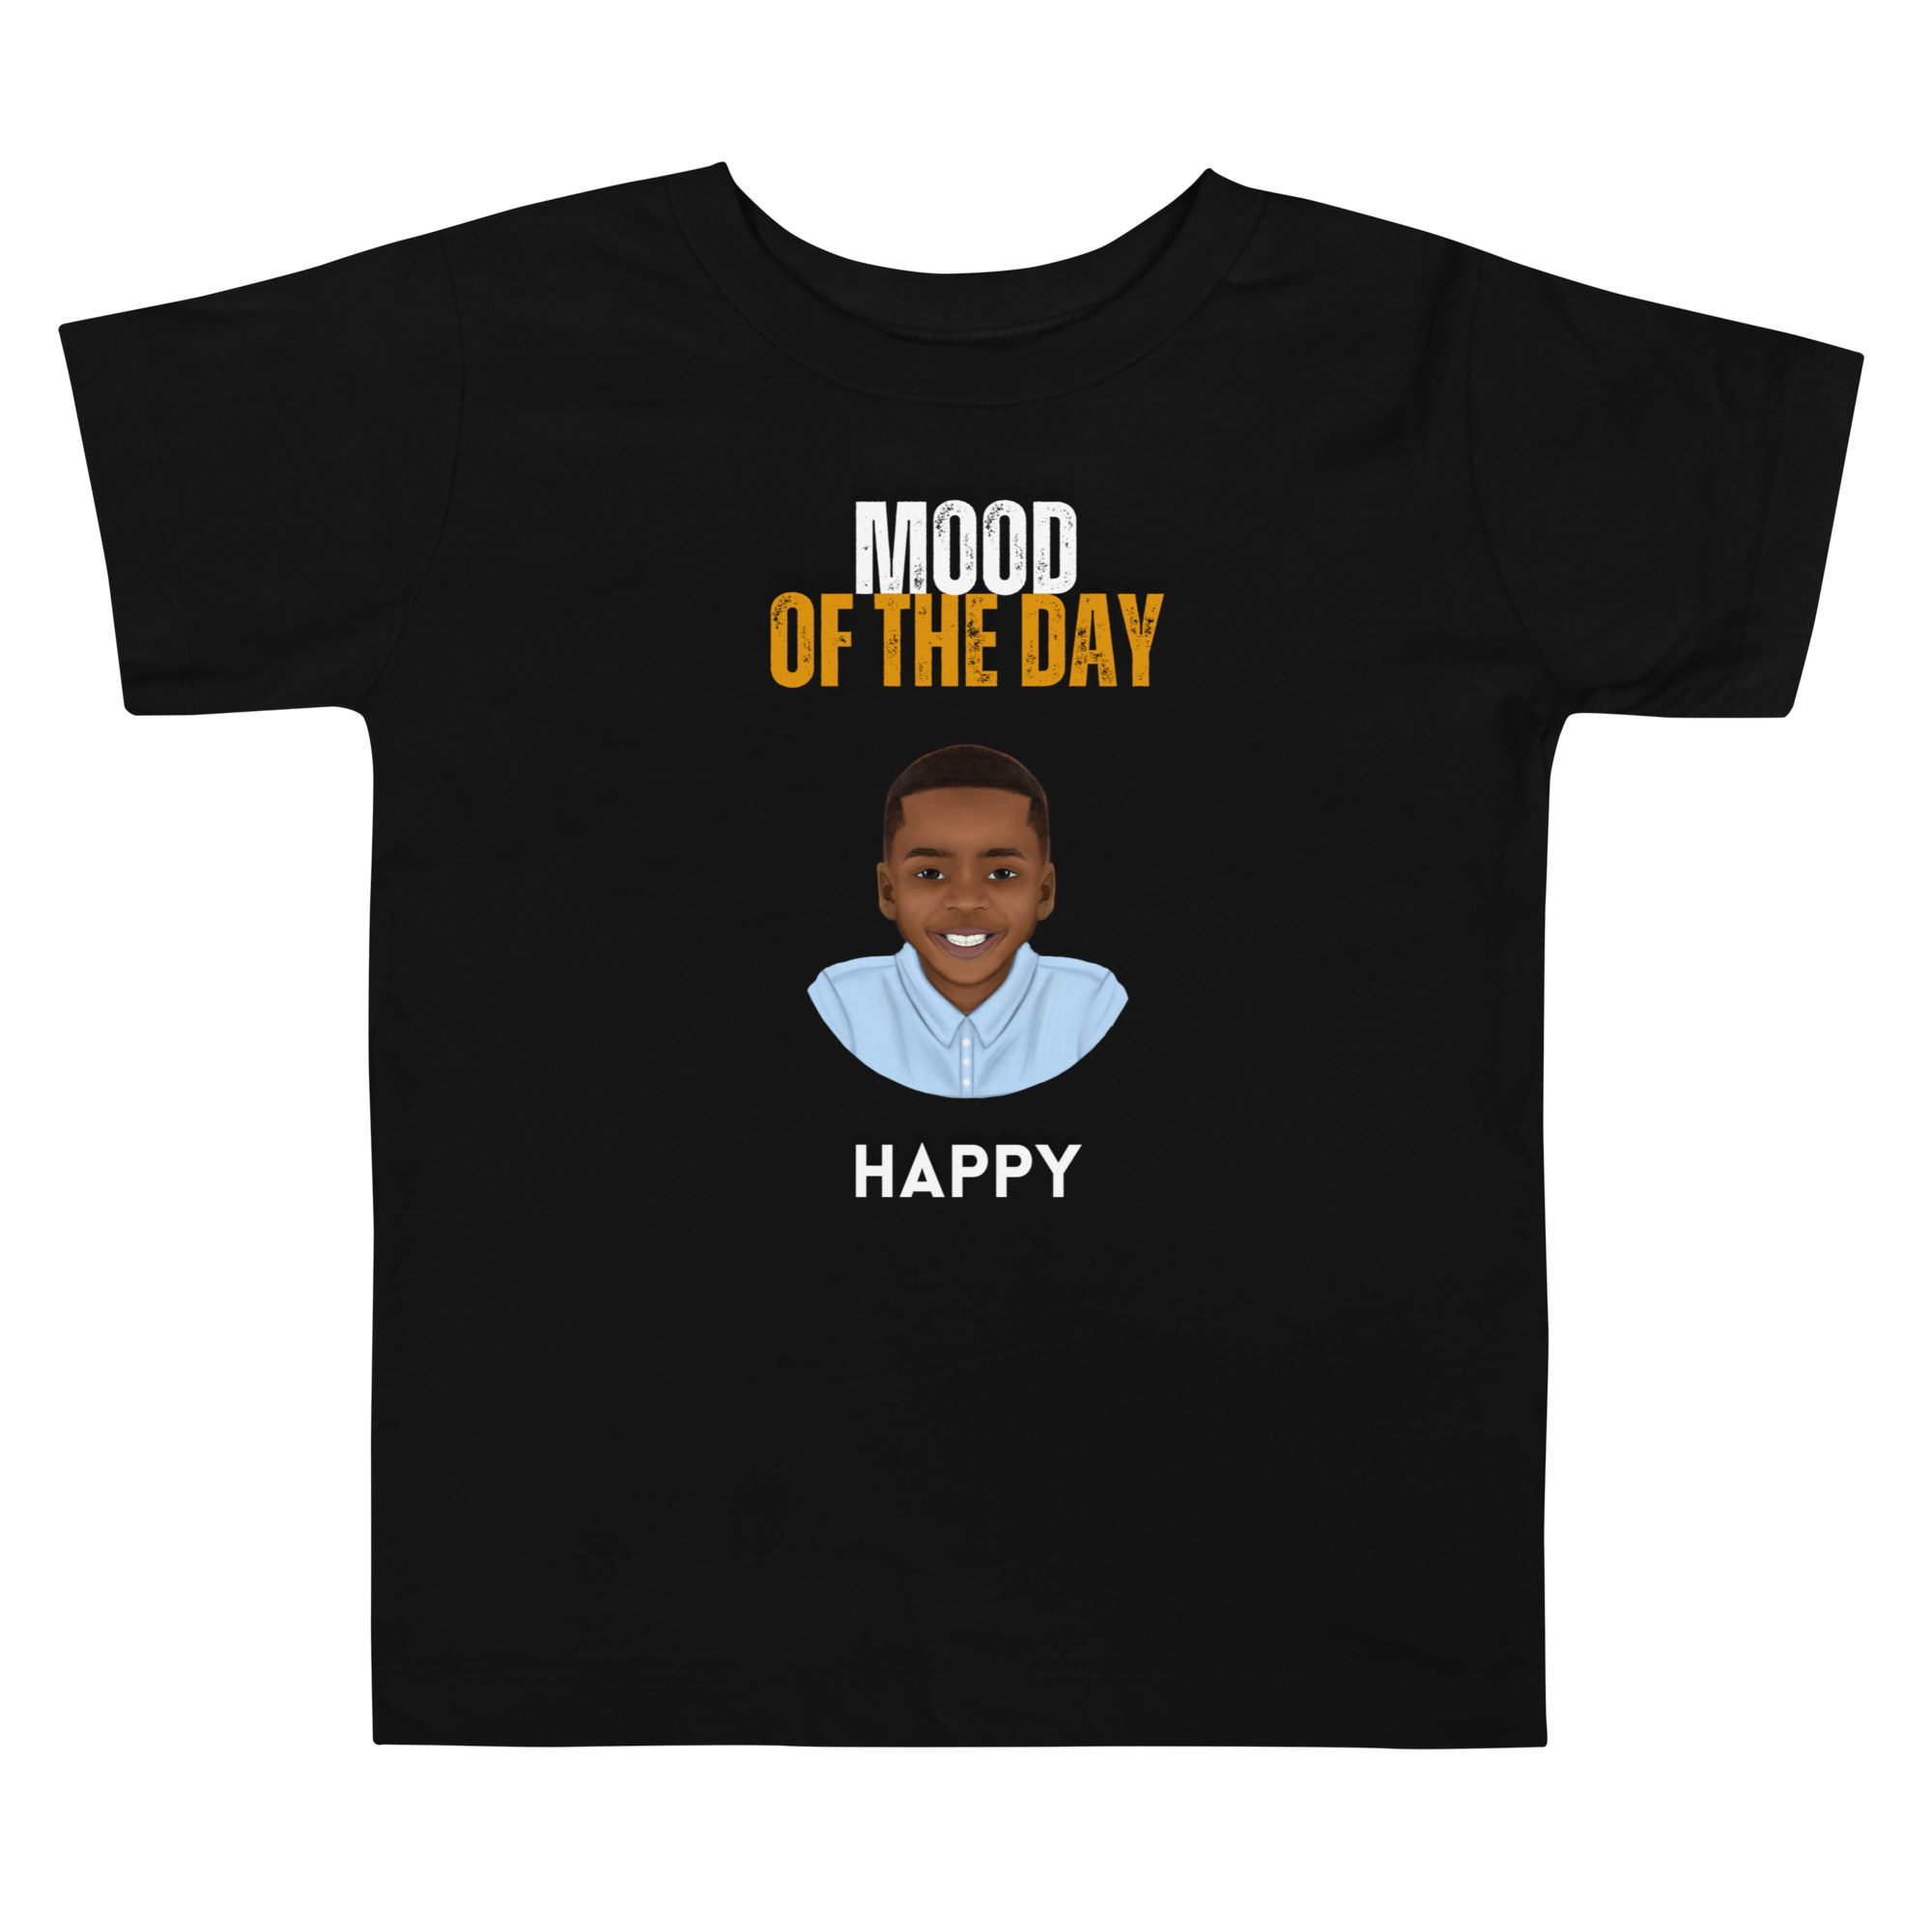 Toddler Mood of the Day T-shirt - Happy Boy